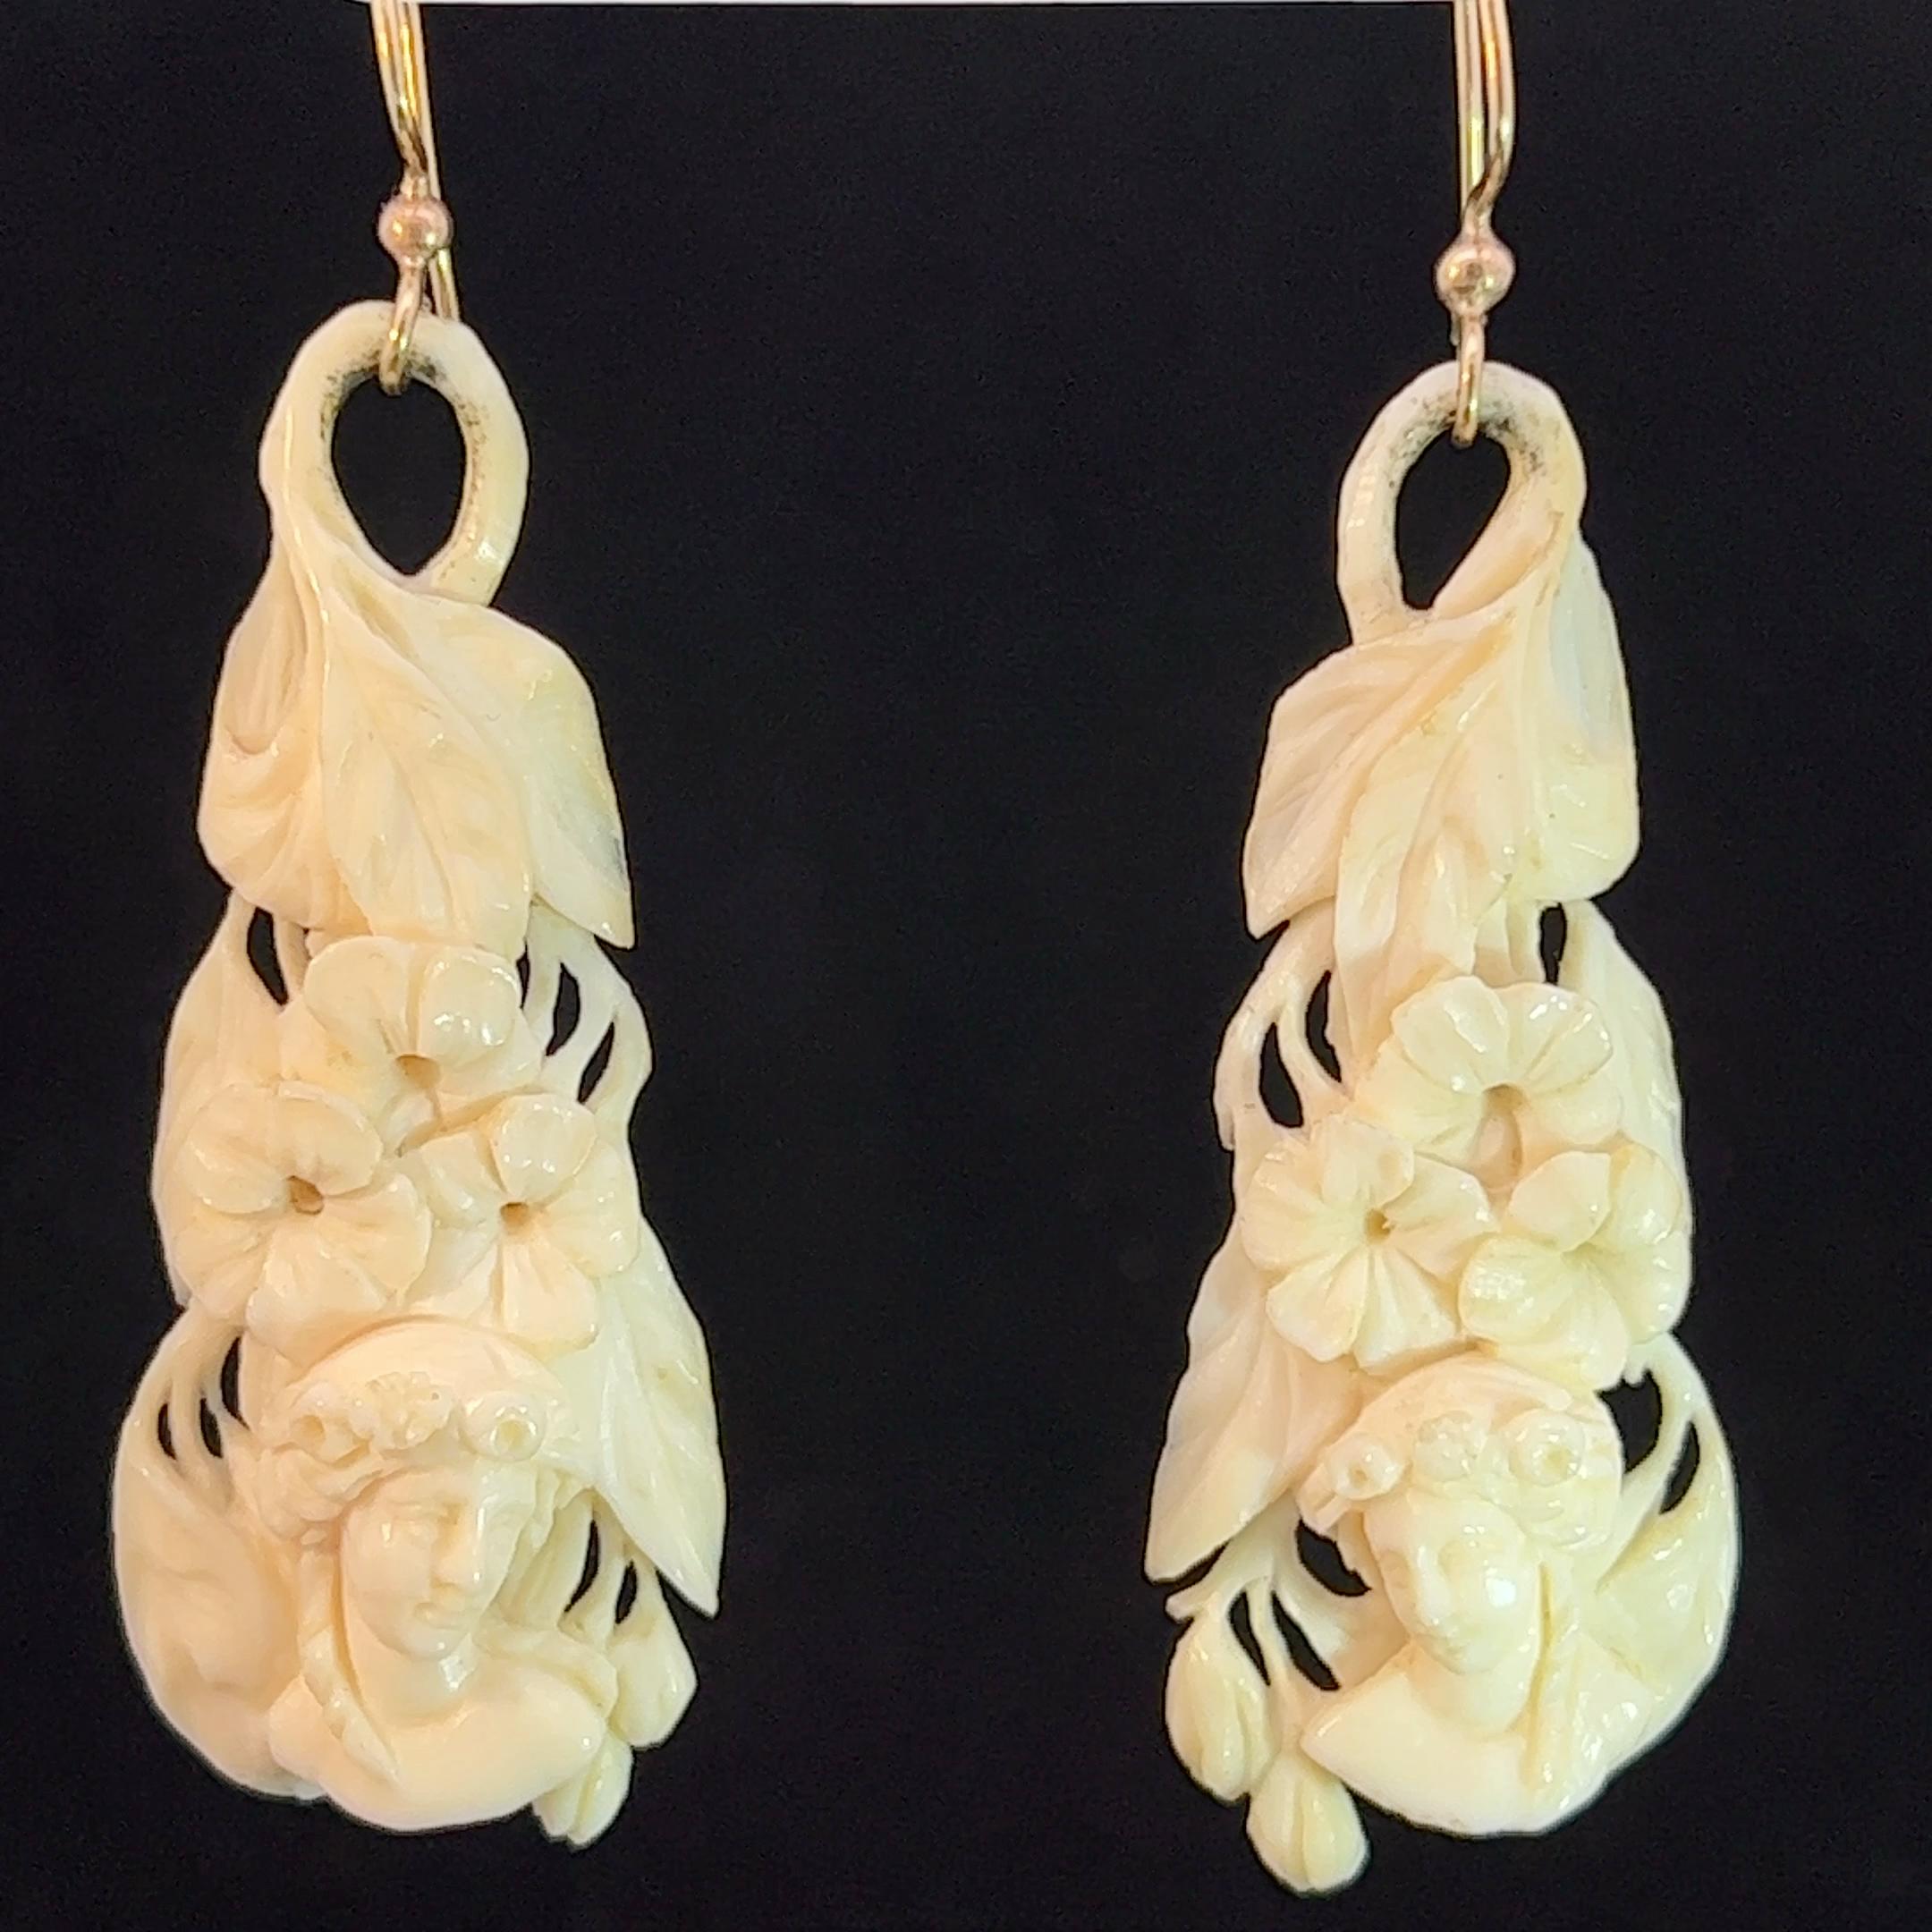 Women's or Men's Mid-Victorian Hand Carved Ivory Long Earrings Circa 1870